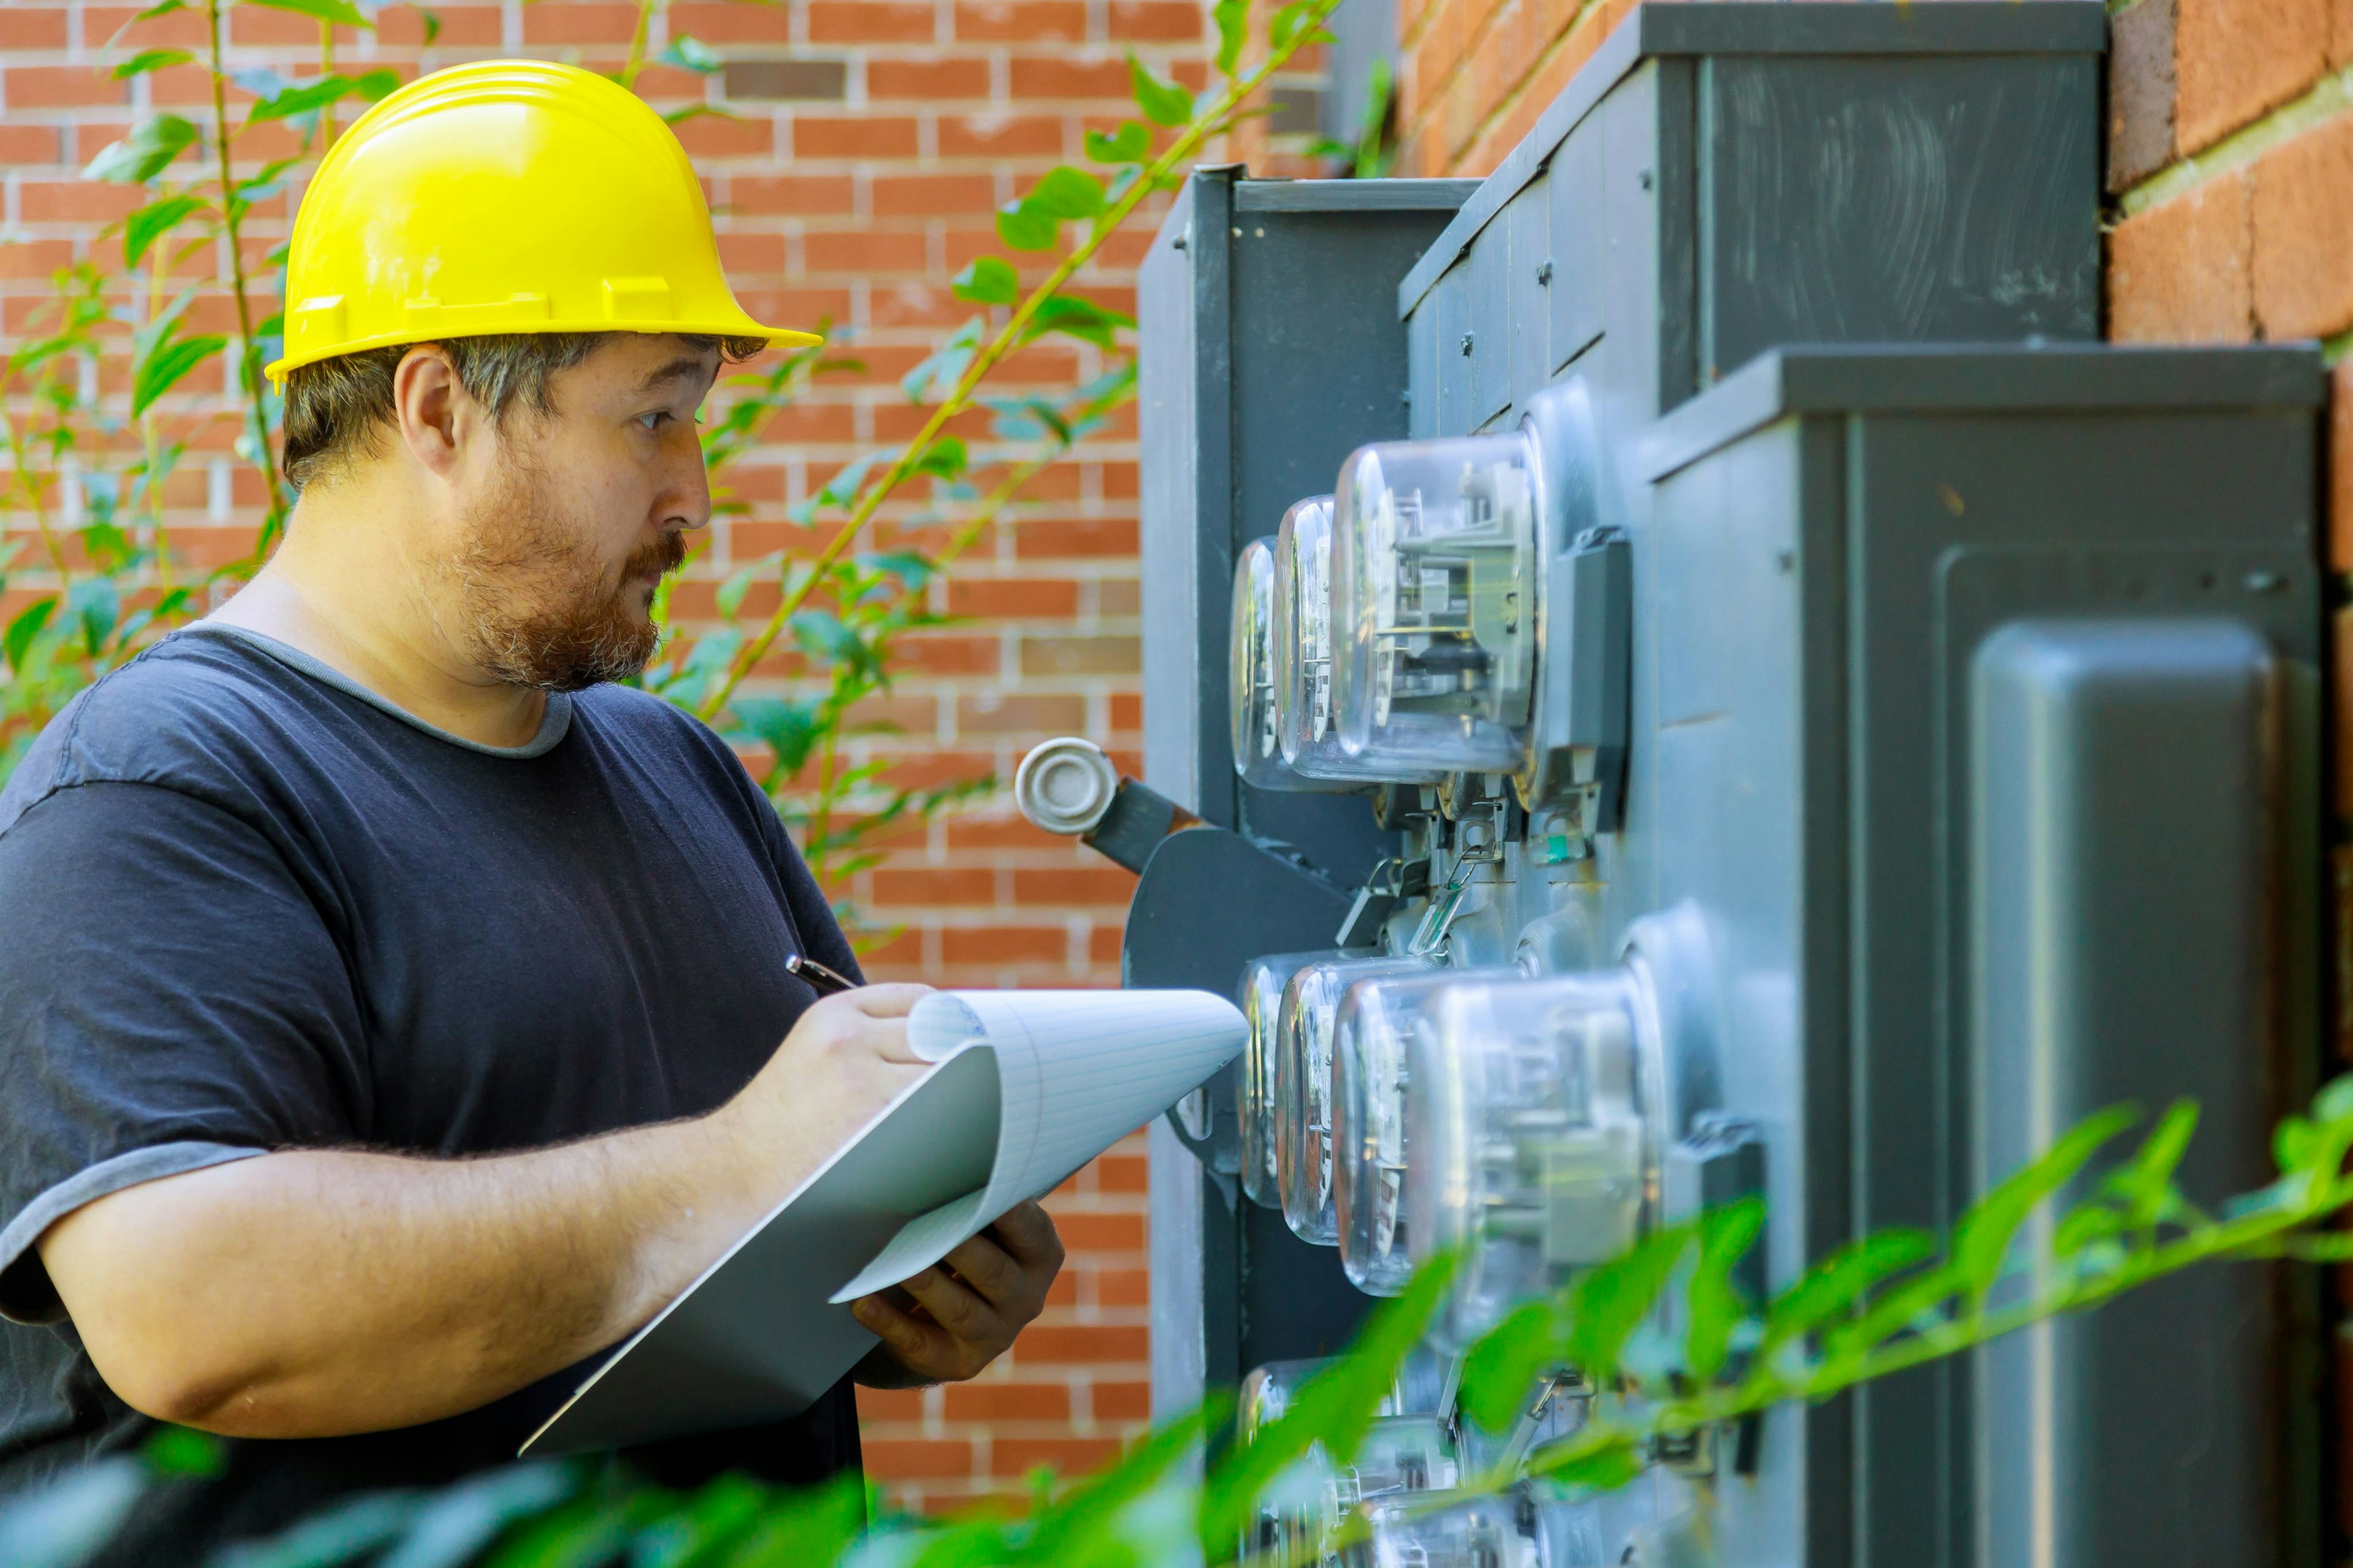 Image of a utility worker inspecting an electric meter